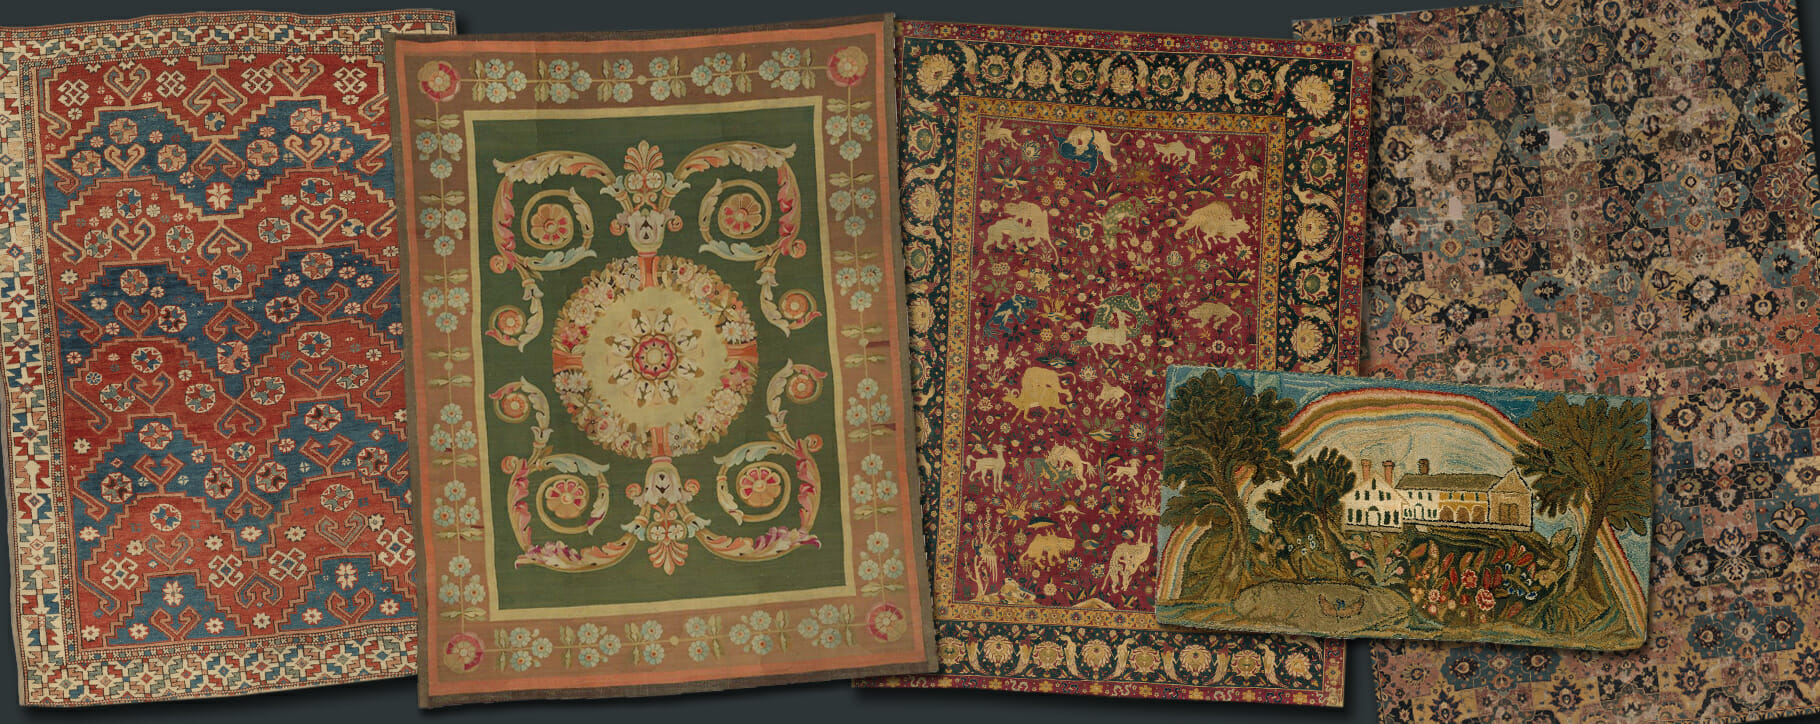 Rug examples